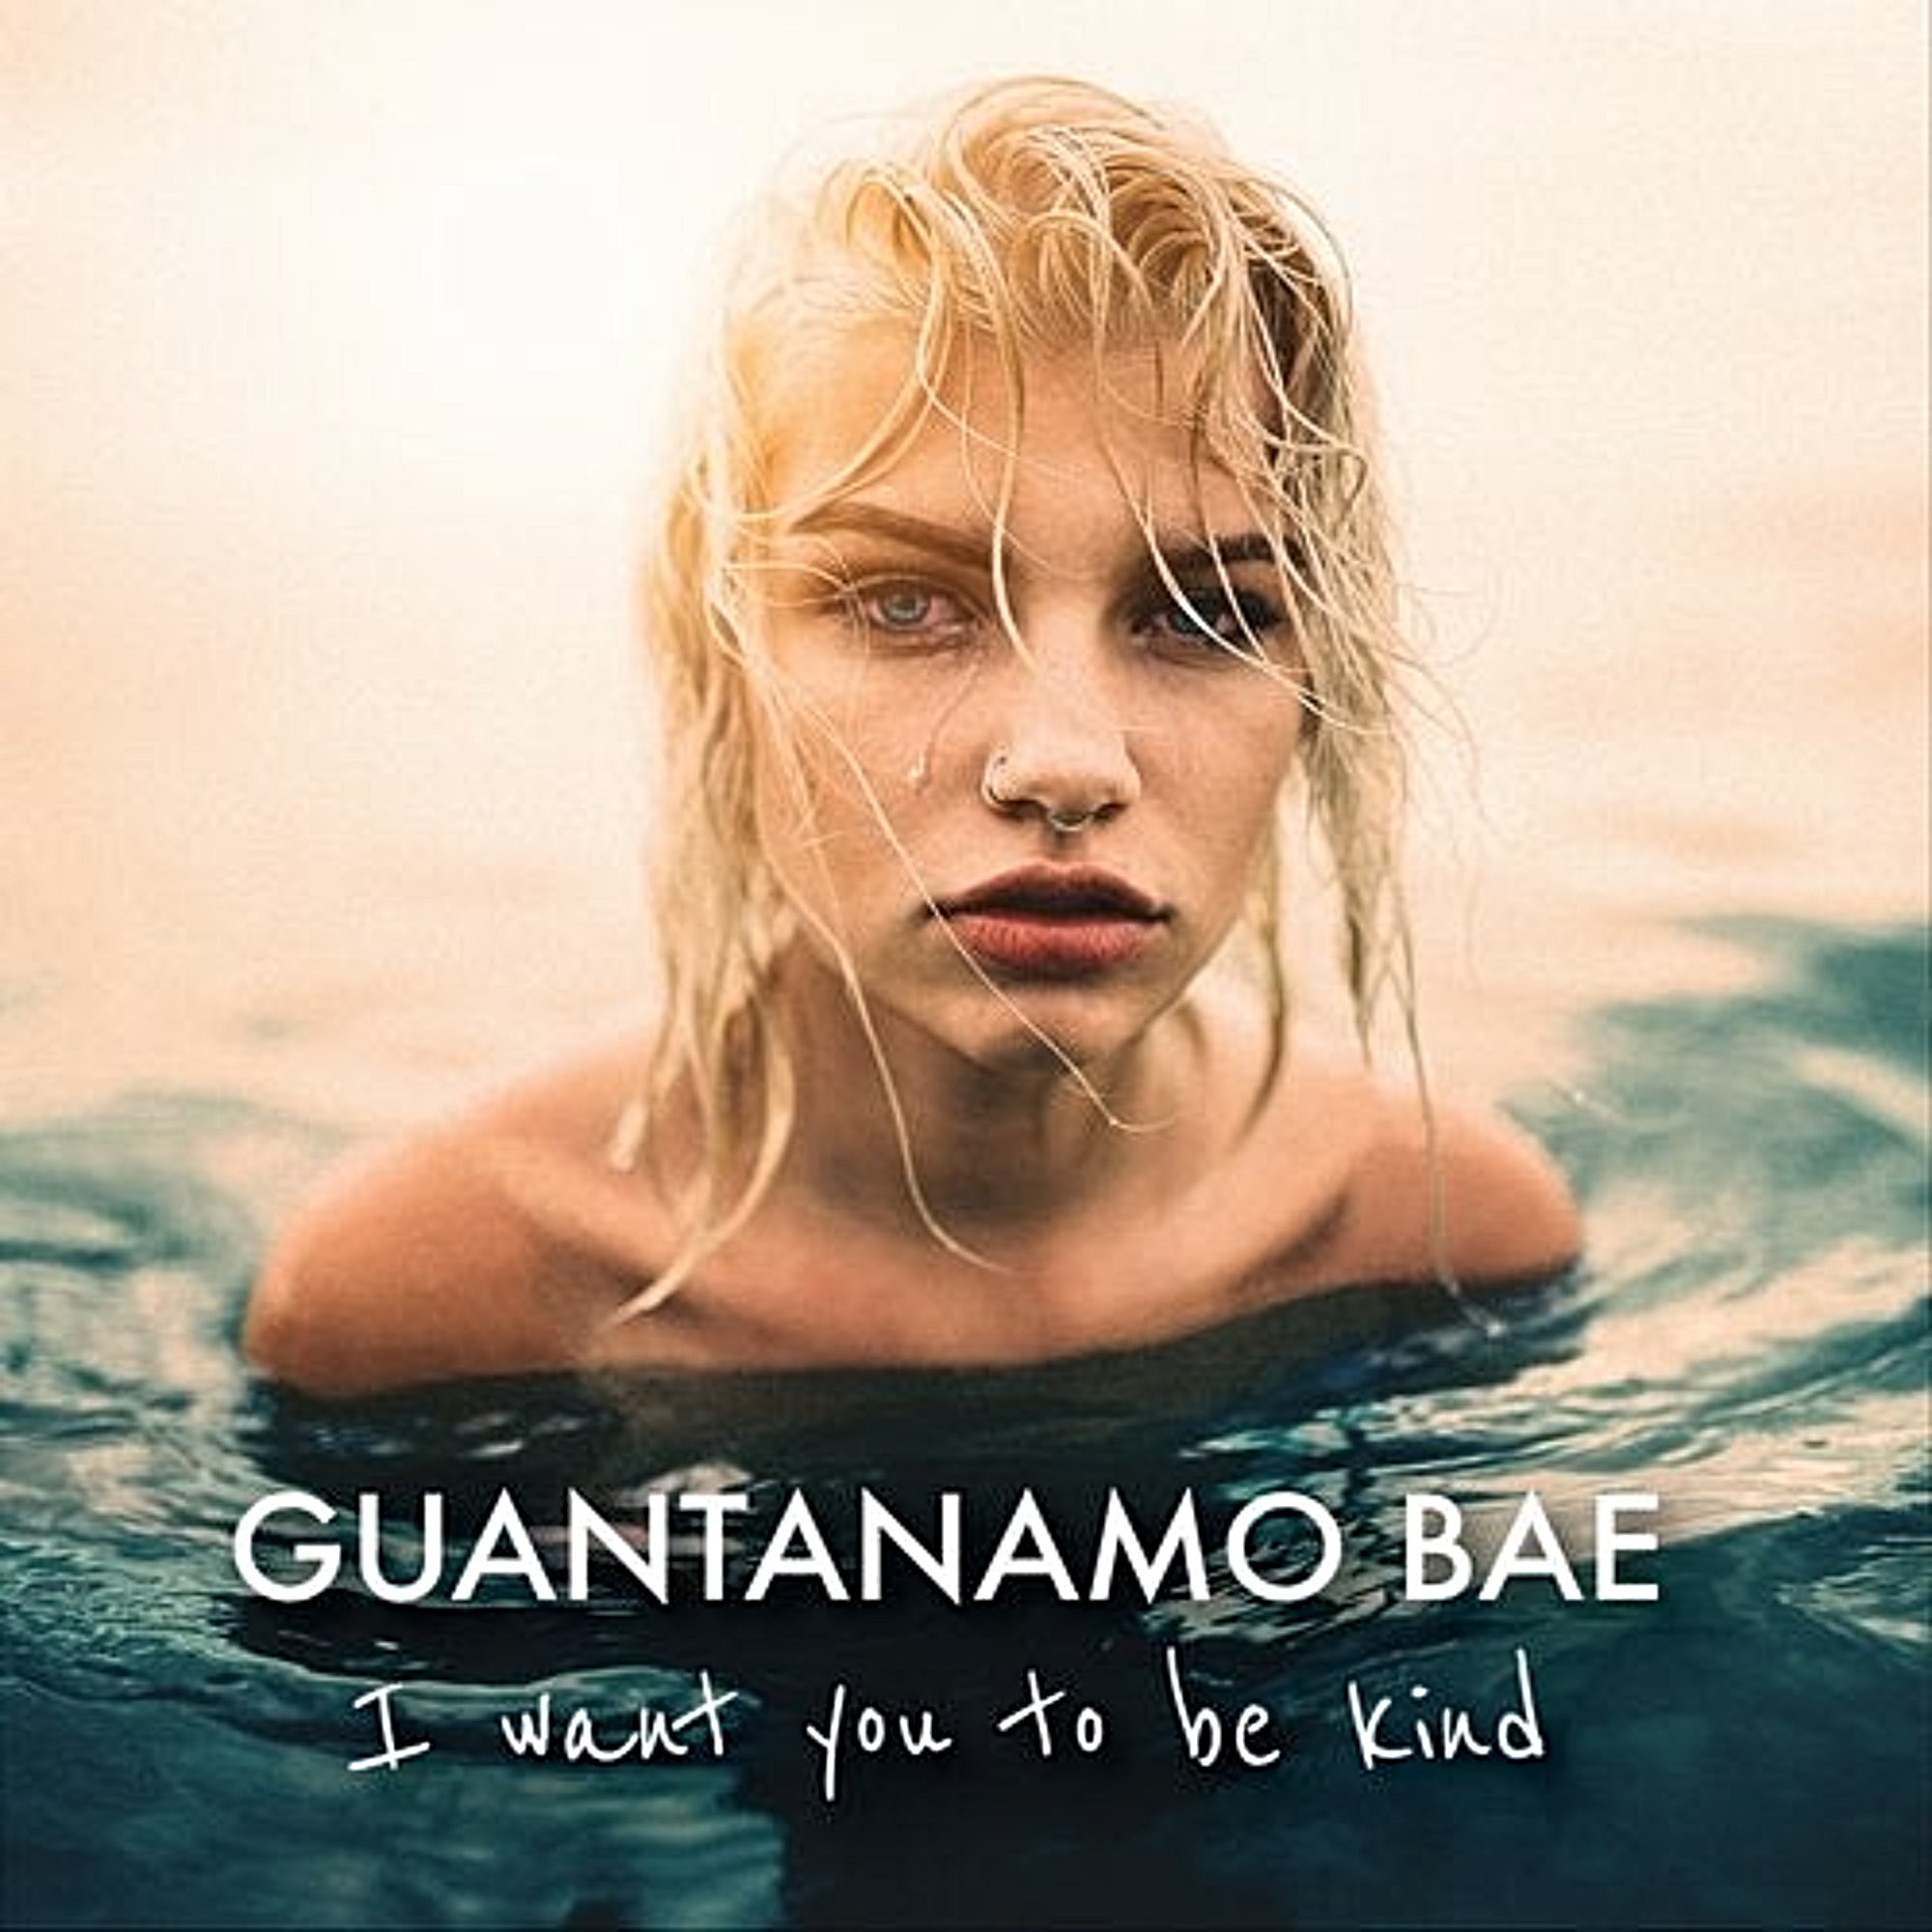 Guantanamo Bae and Club Restricted Promo Host Remix Competition with Cash Prizes